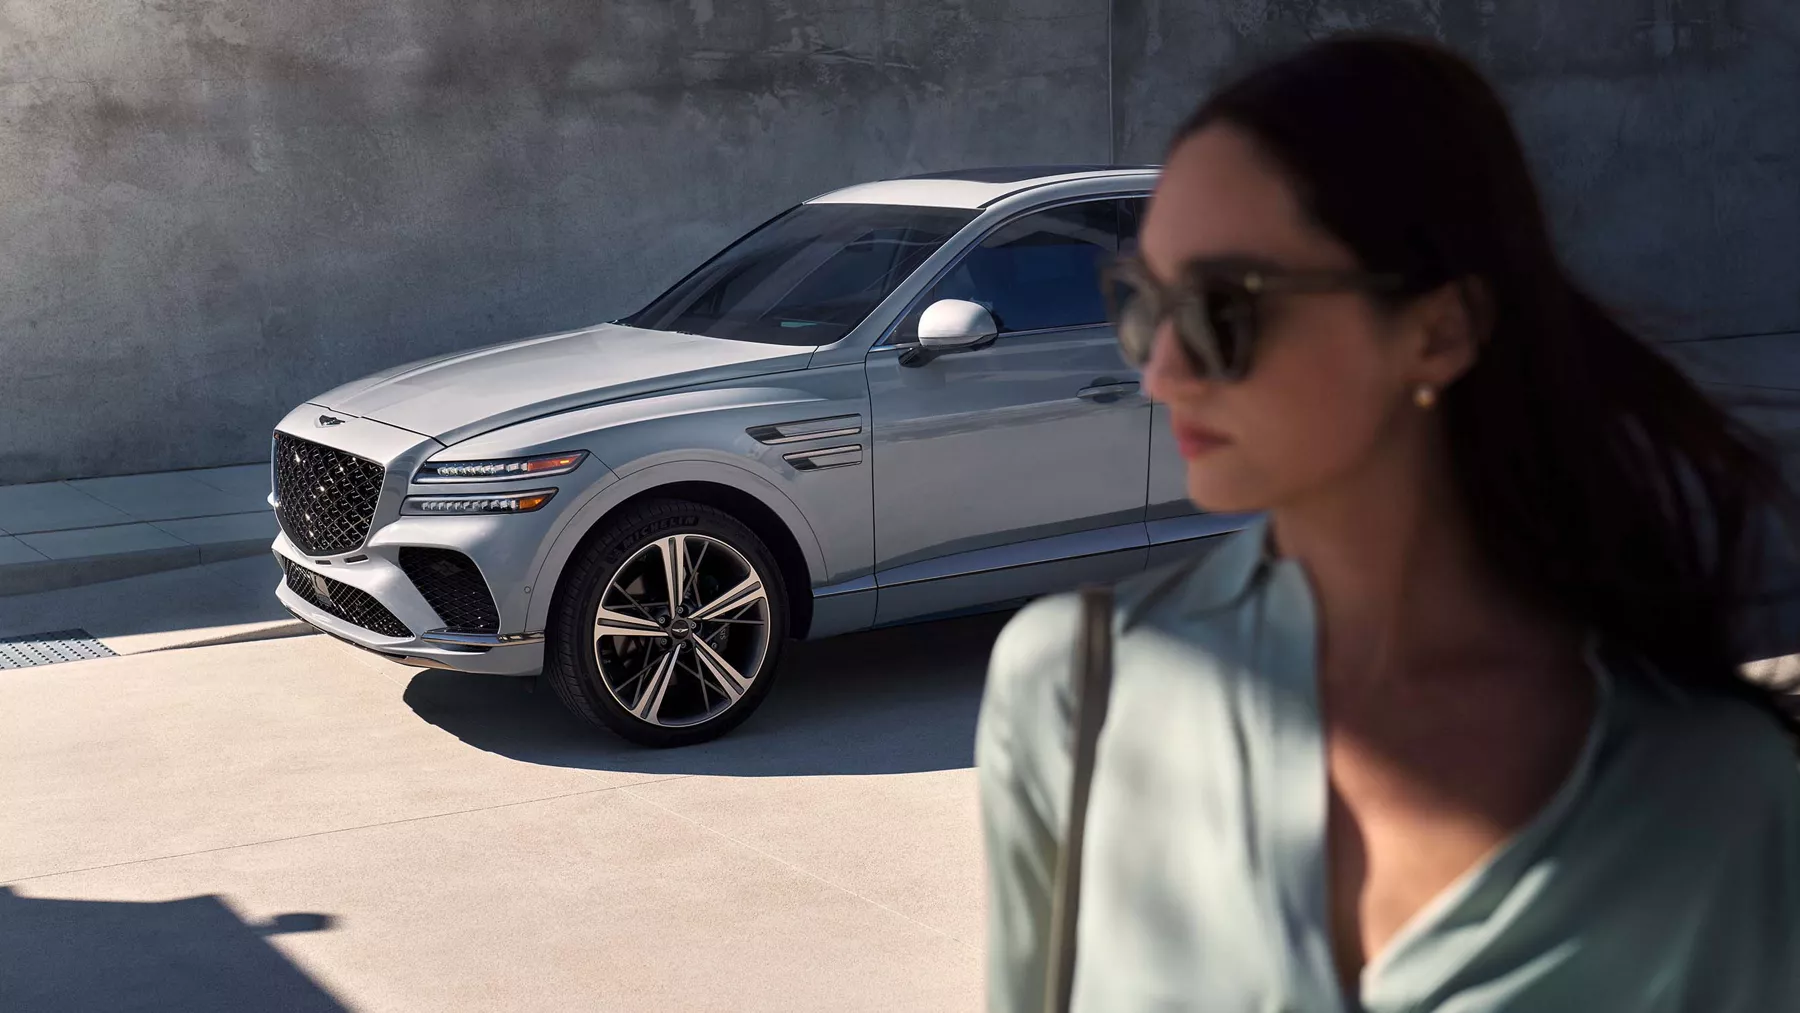 Side profile shot of the GV80 Coupe with a woman in the foreground. 